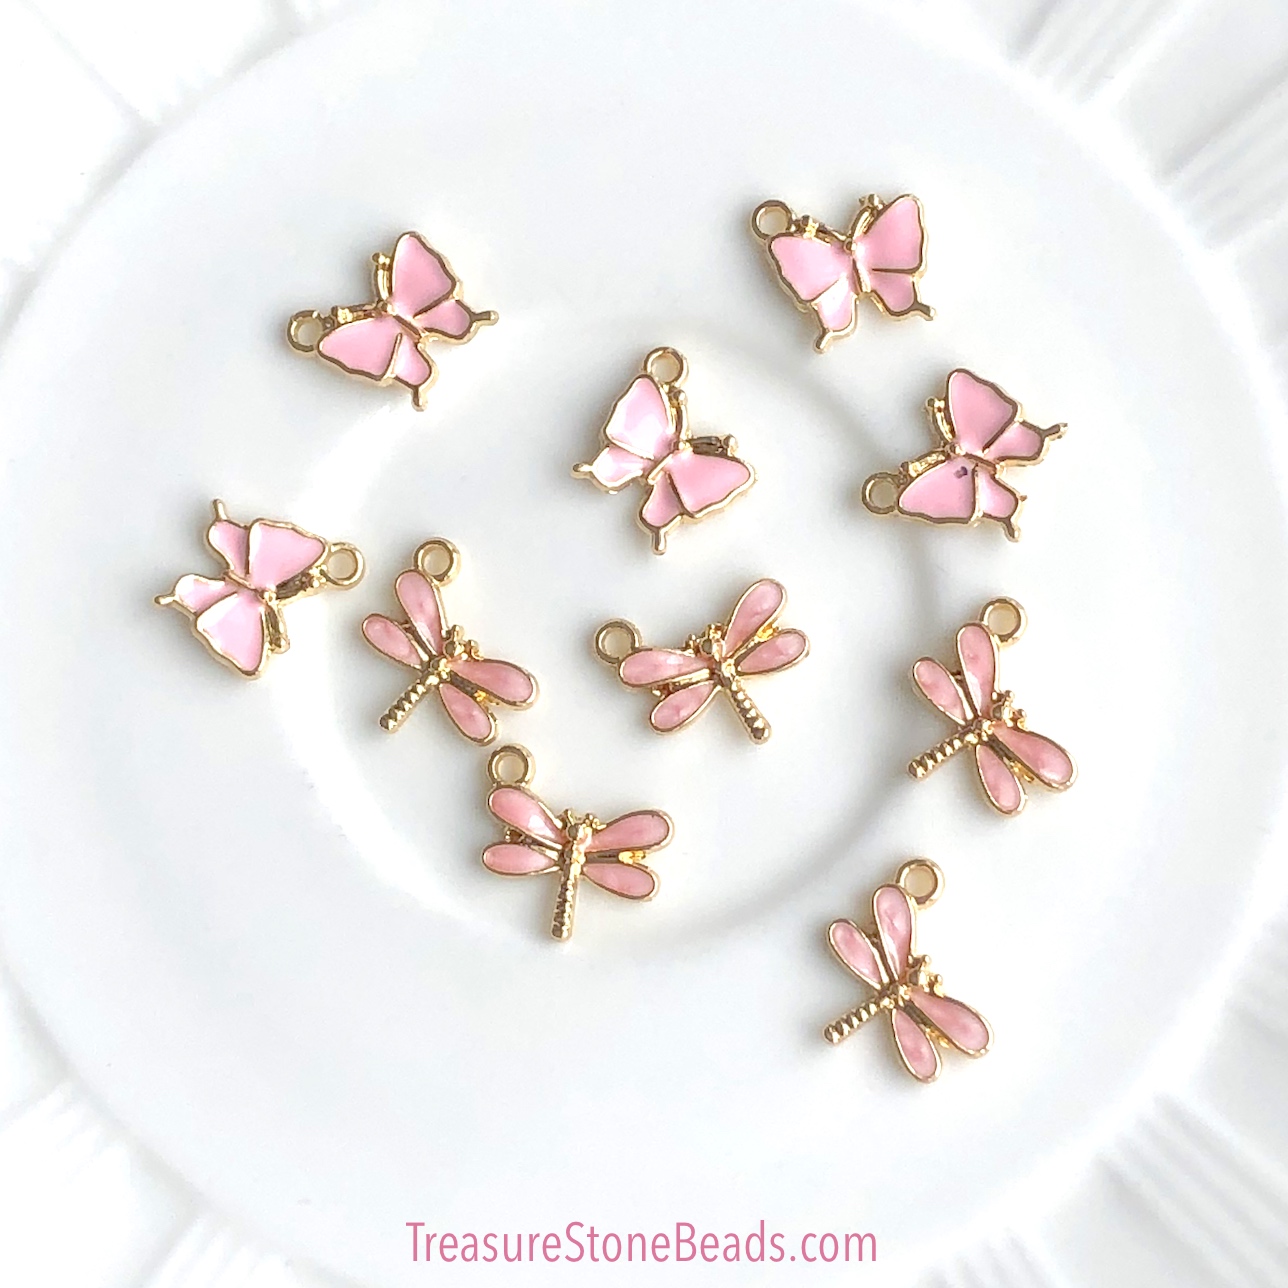 Charm / Pendant, 15x12mm pink dragonfly, gold, Enamel. pack of 3 - Click Image to Close